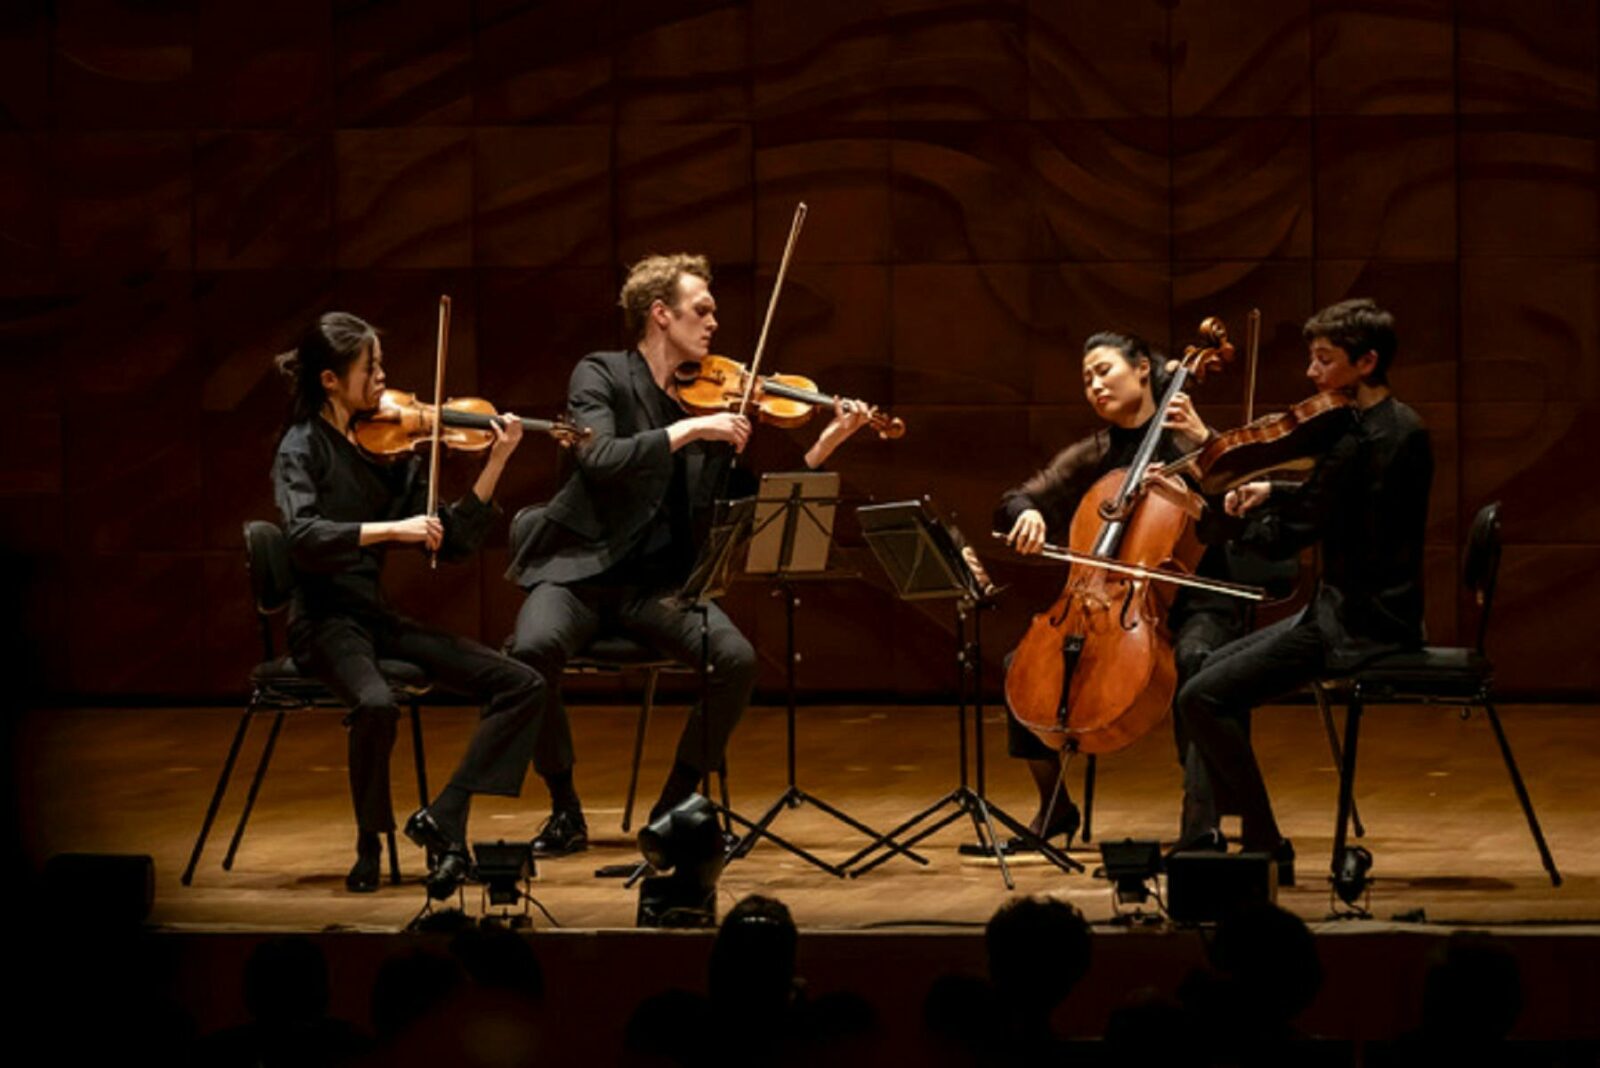 a string quartet, playing on a stage. All four musicians are dressed in black & lit by a spotlight